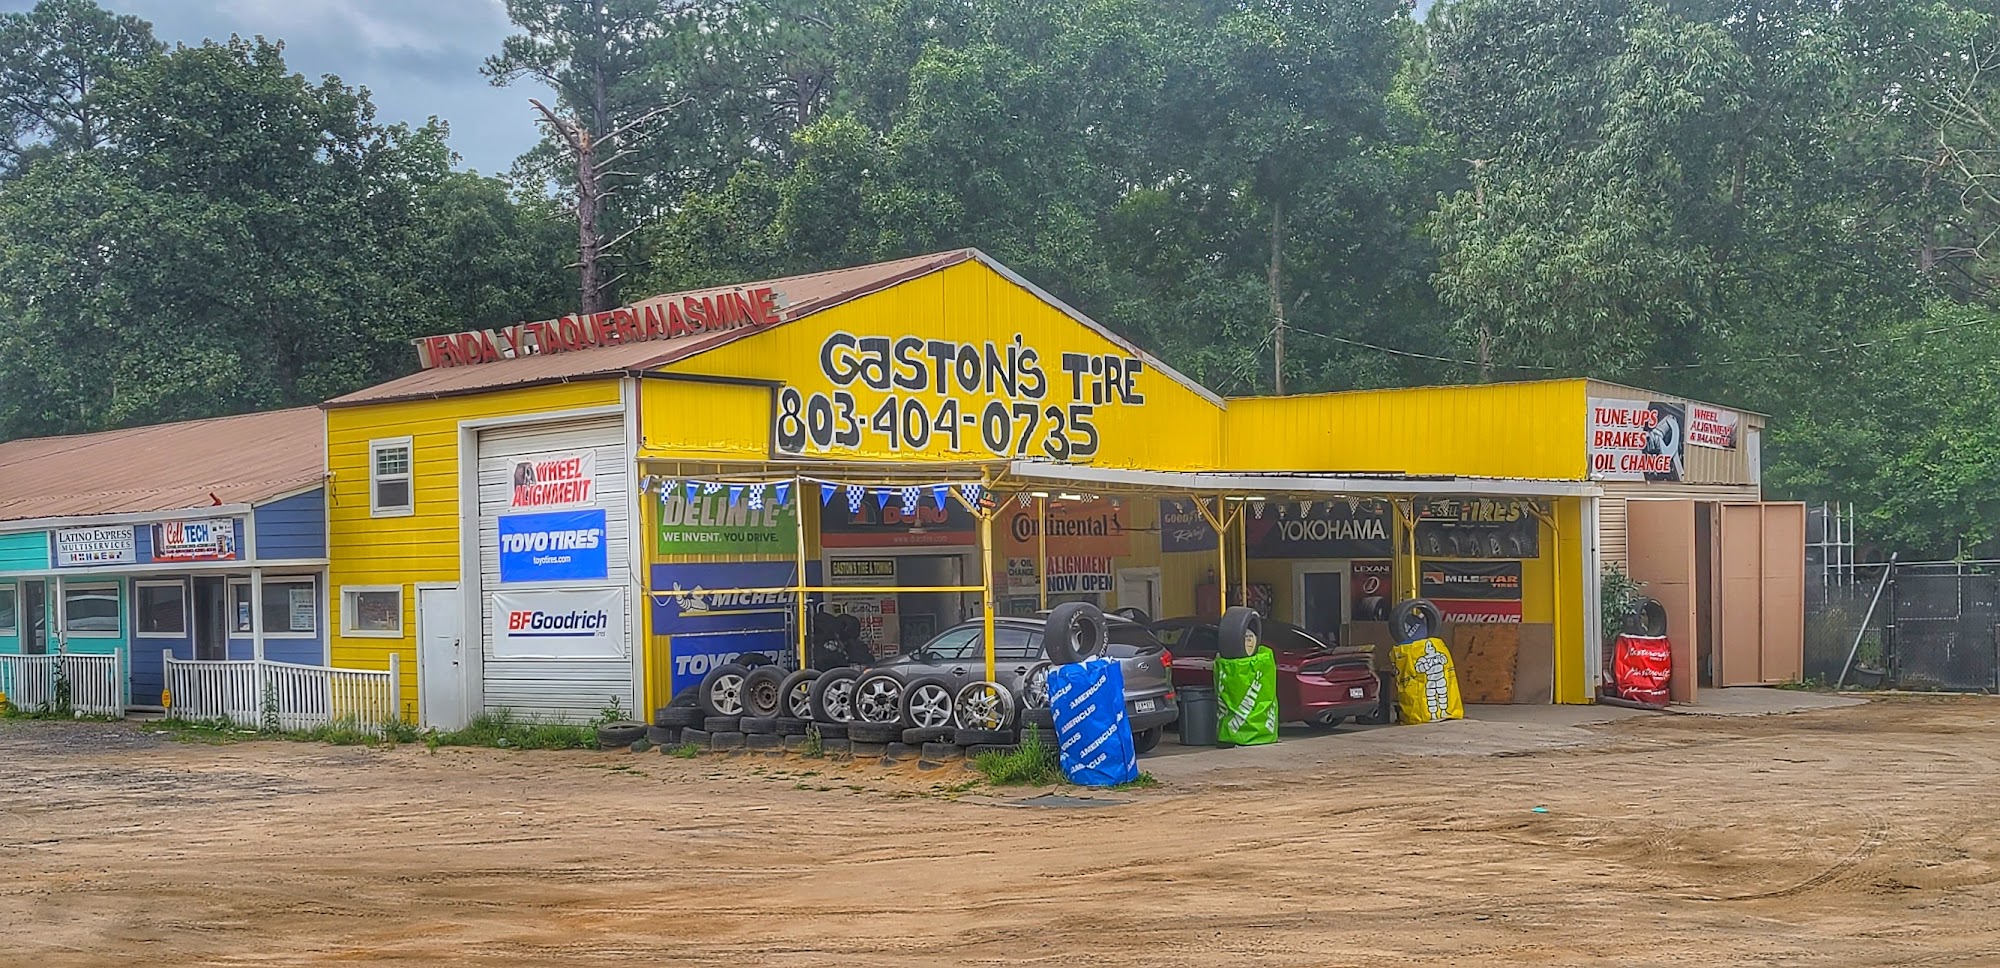 Gaston tire and towing